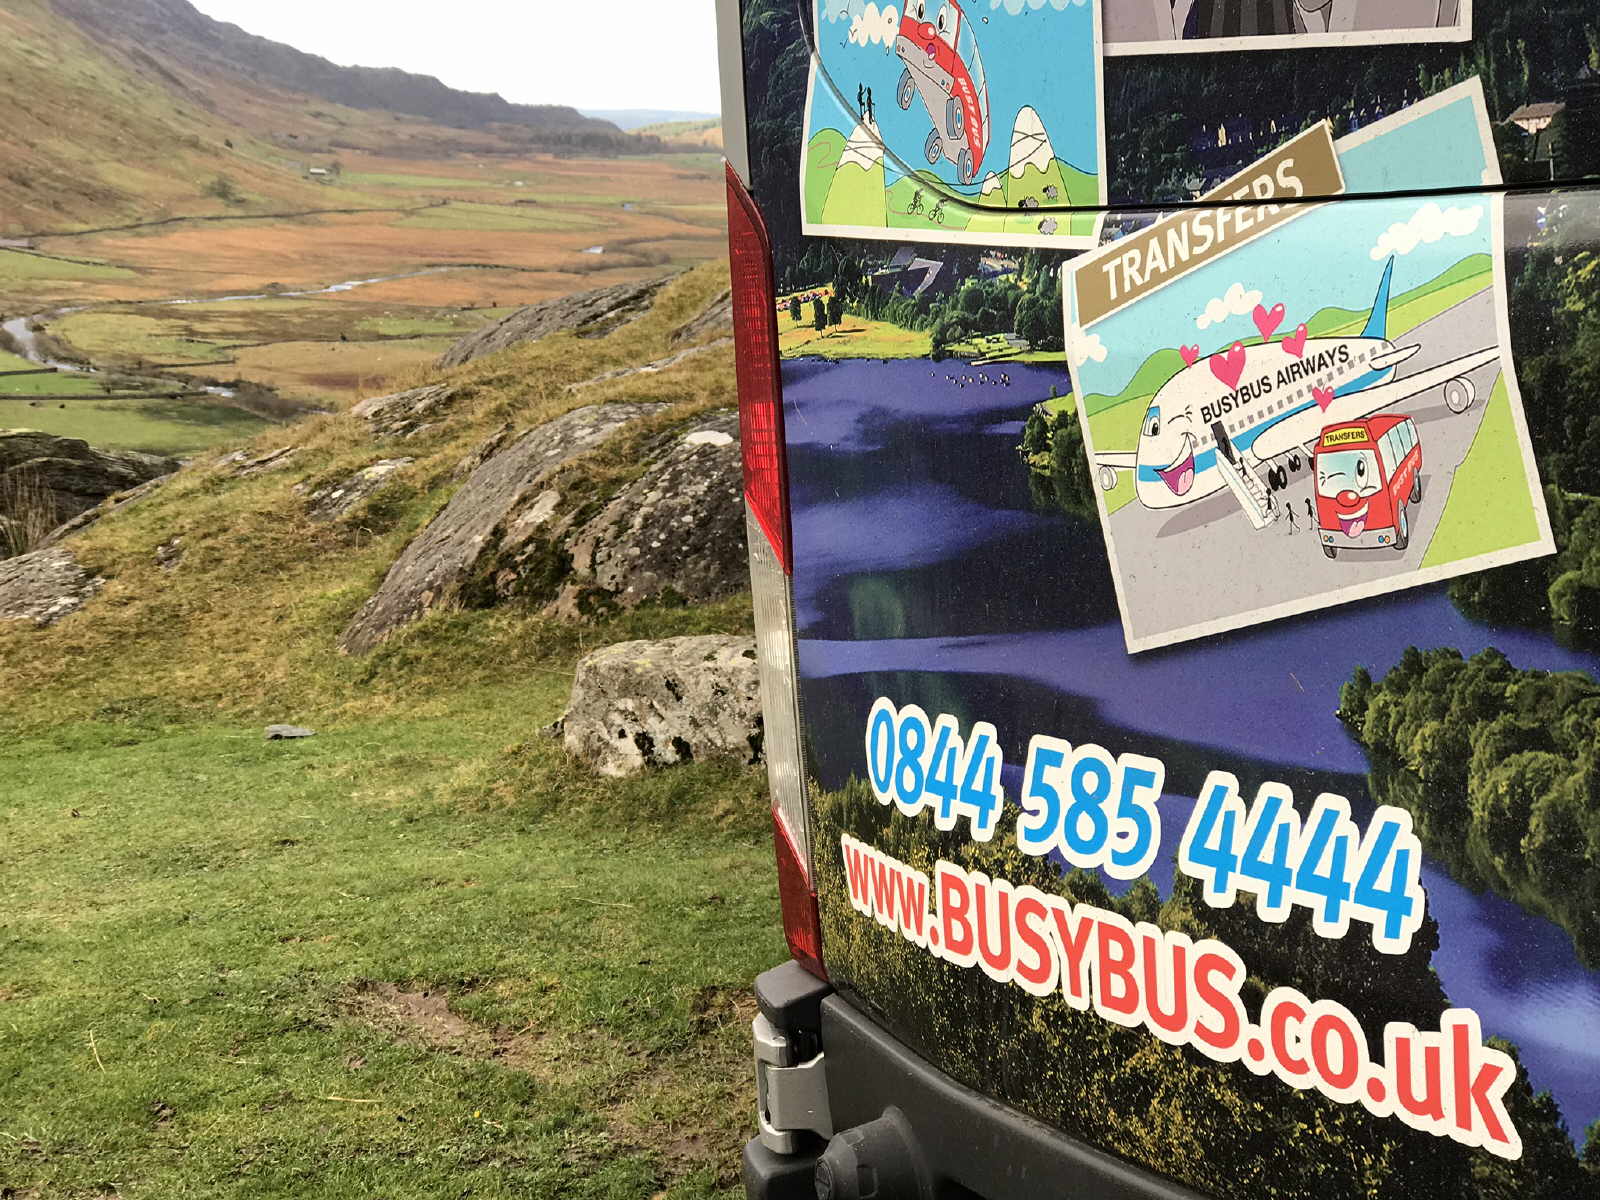 bus tours of wales